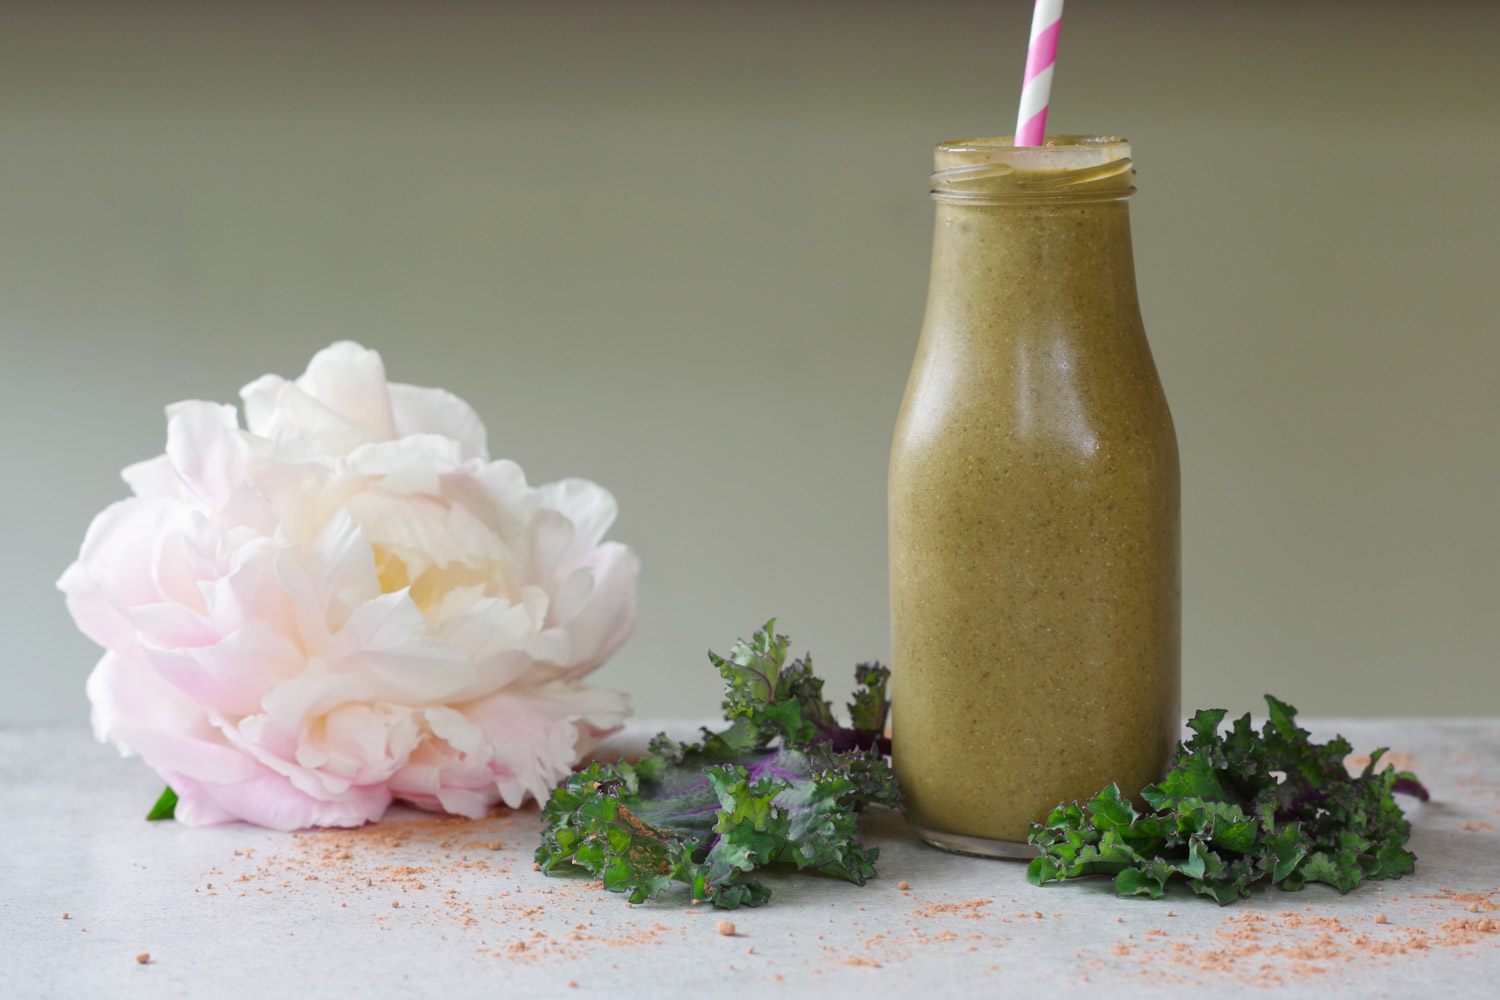 Chocolate Almond Kale Smoothie makes a great Meal on the Go, by Beautiful Ingredient